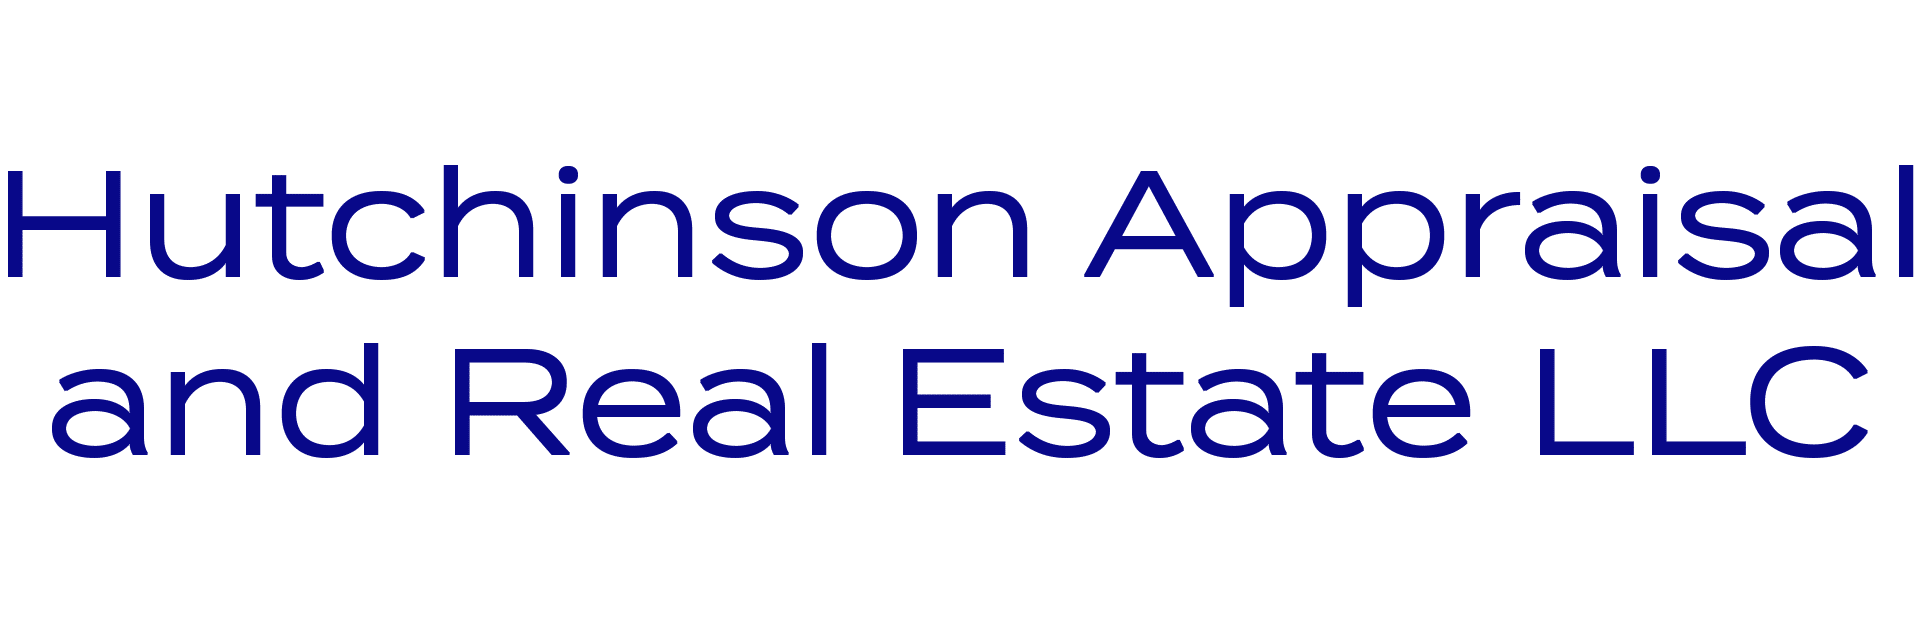 http://Logo%20of%20Hutchinson%20Appraisal%20and%20Real%20Estate%20LLC